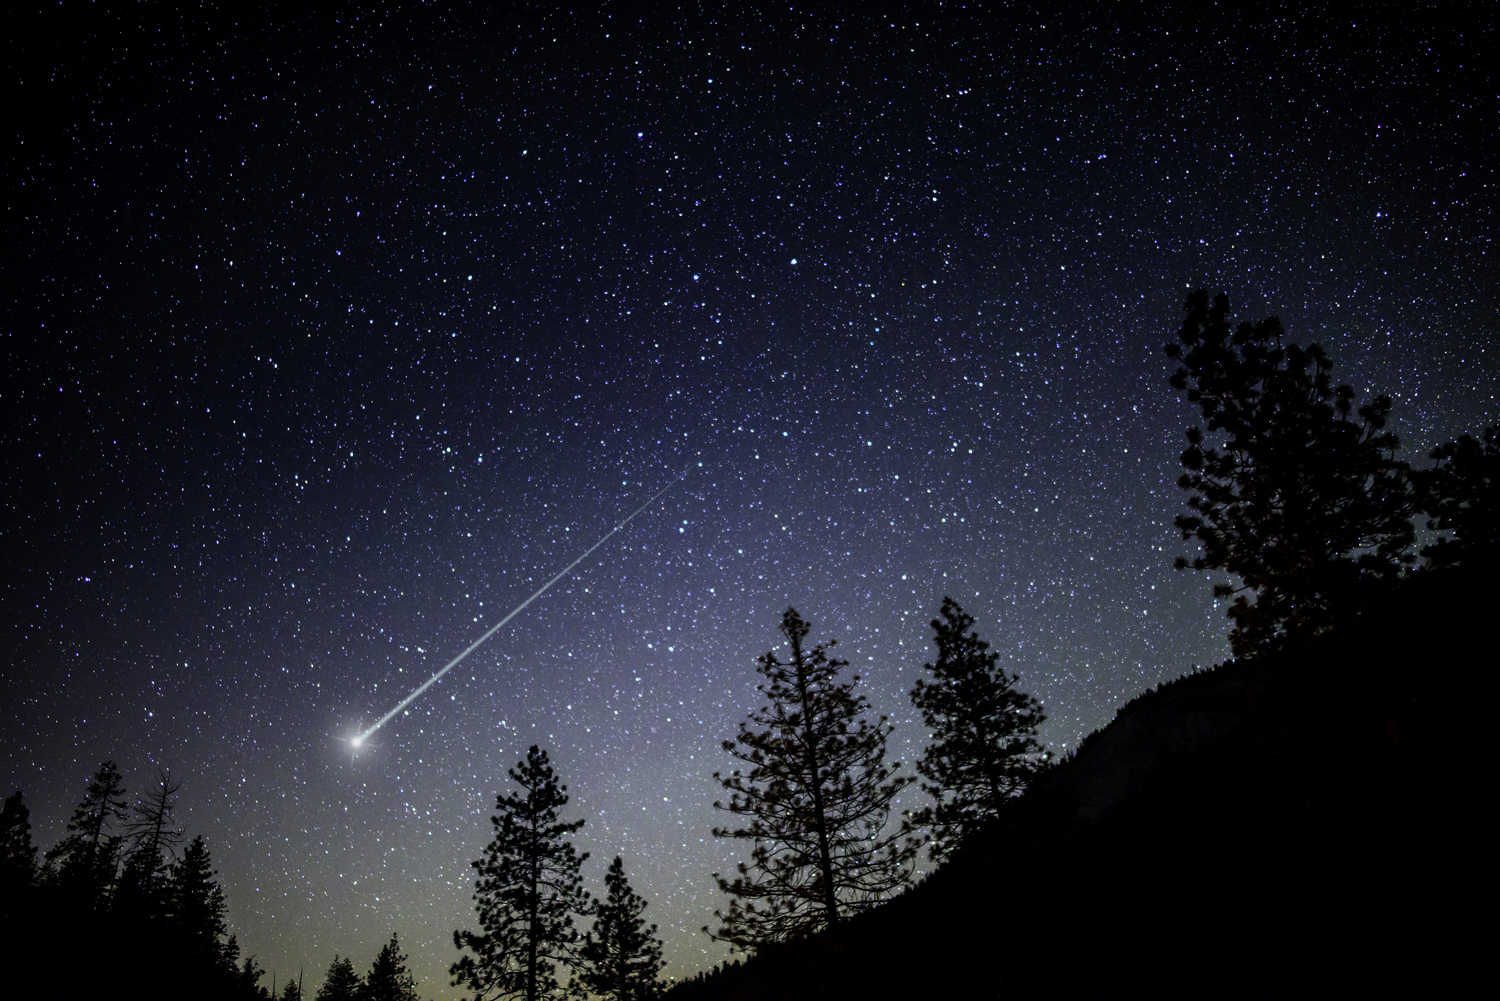 Night sky with a shooting star passing by.